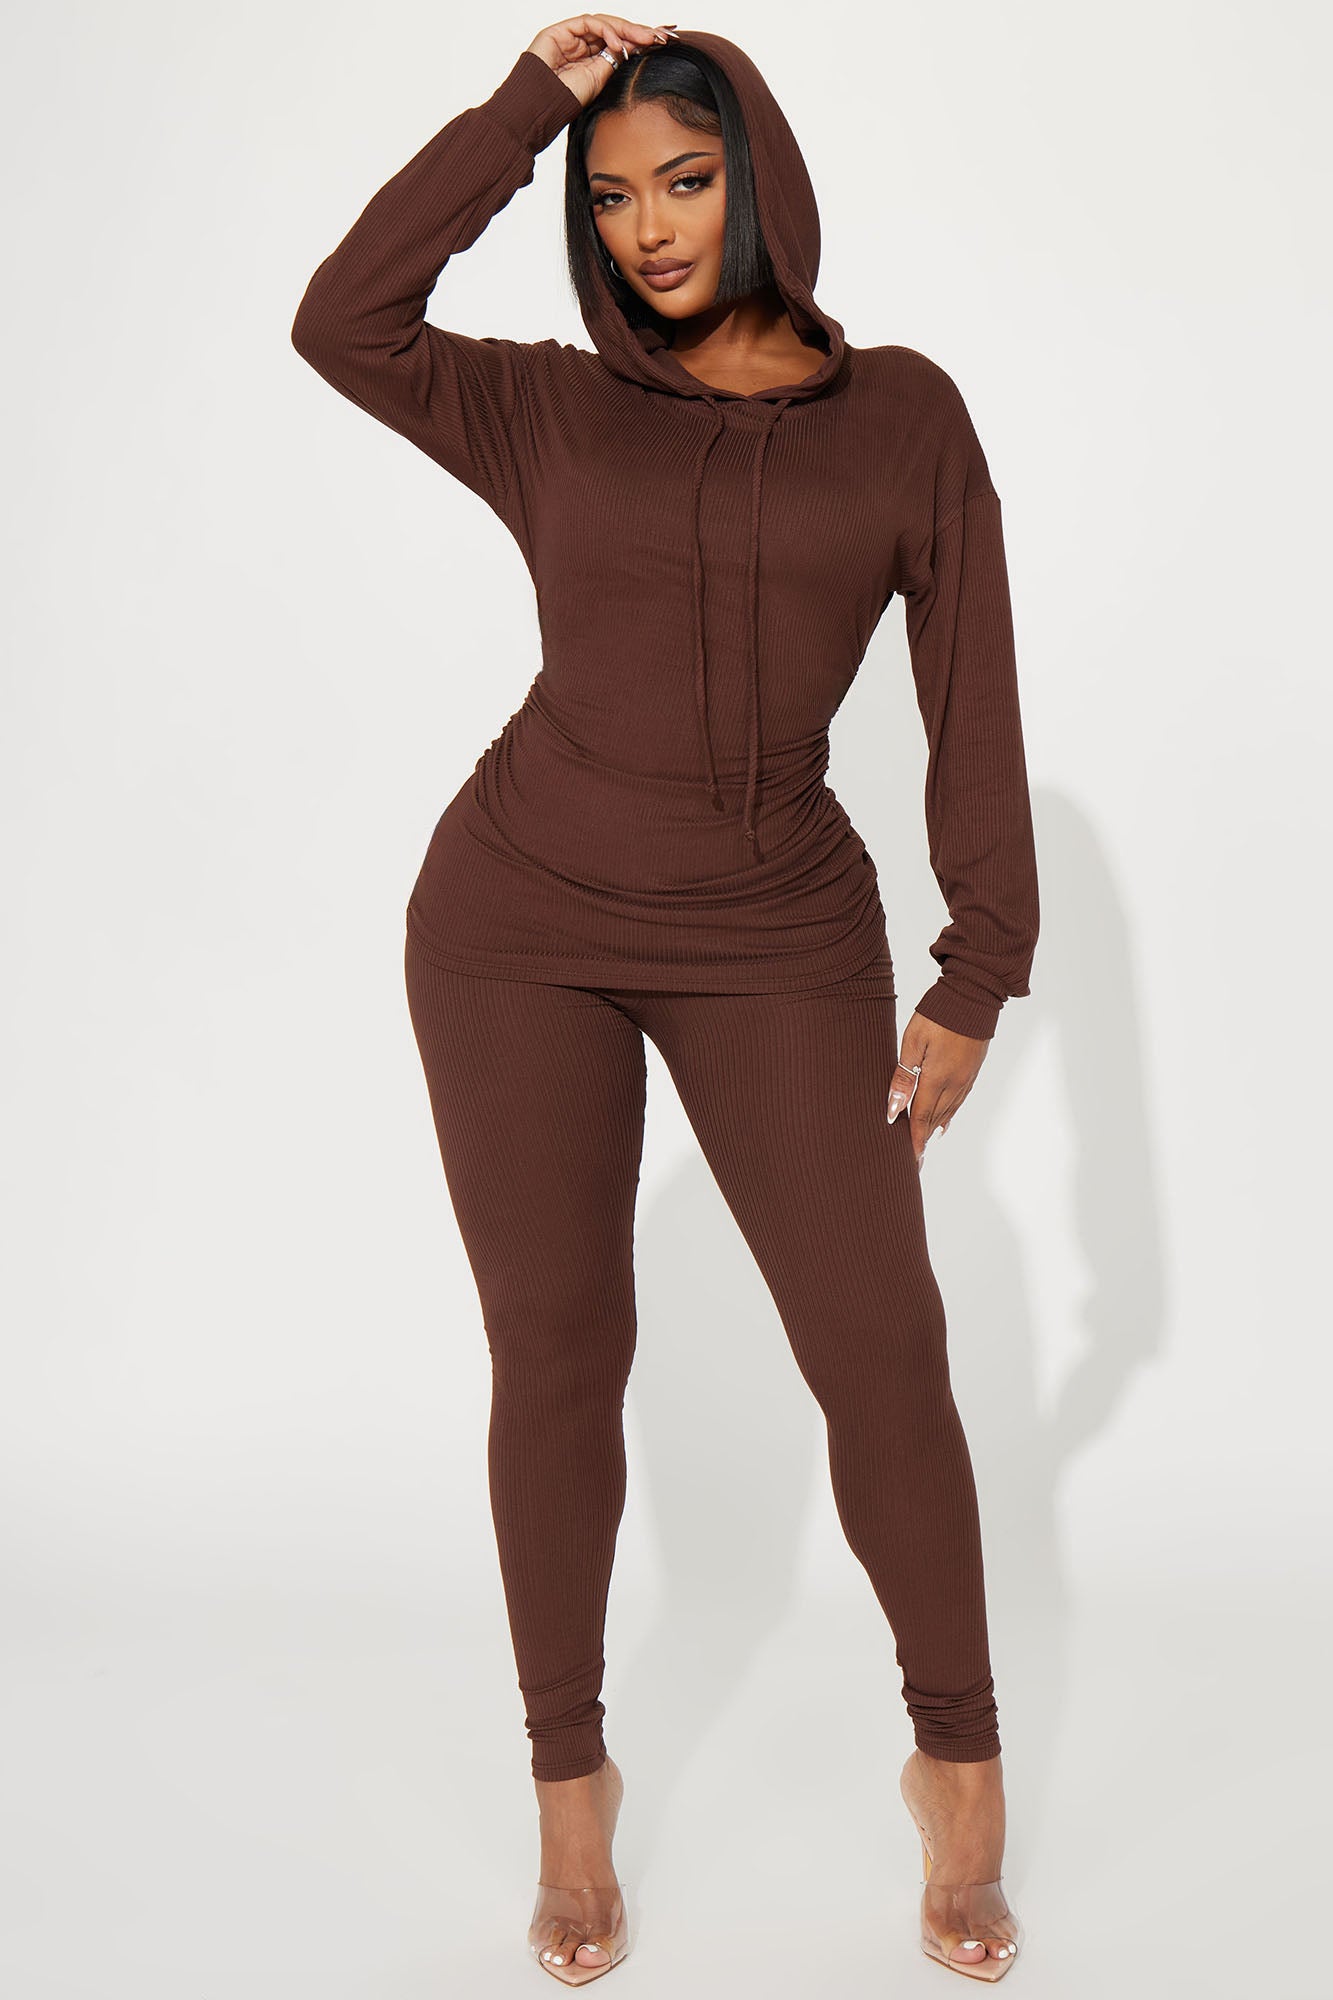 Brown Colour Leggings | Find Your Perfect Match